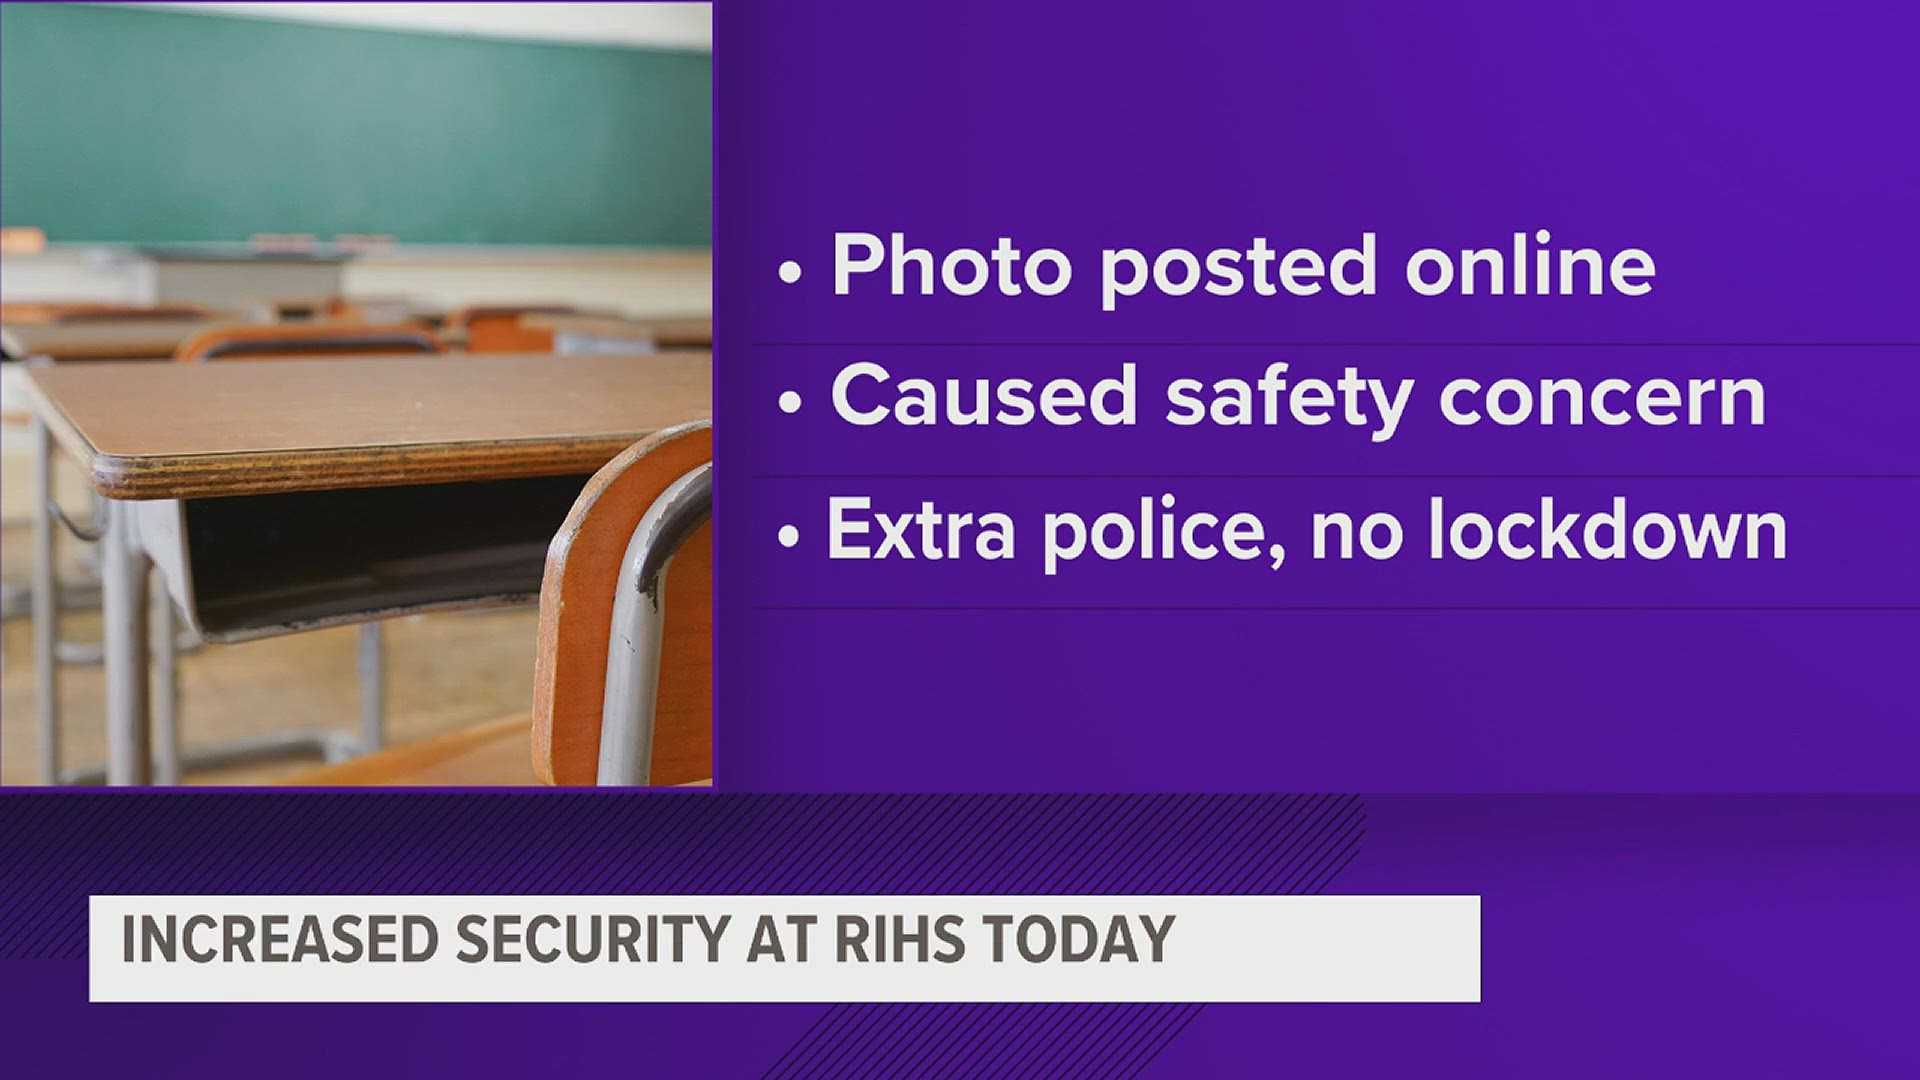 School officials said more officers were at the high school this morning out of an abundance of caution, but the school didn't go into lockdown.